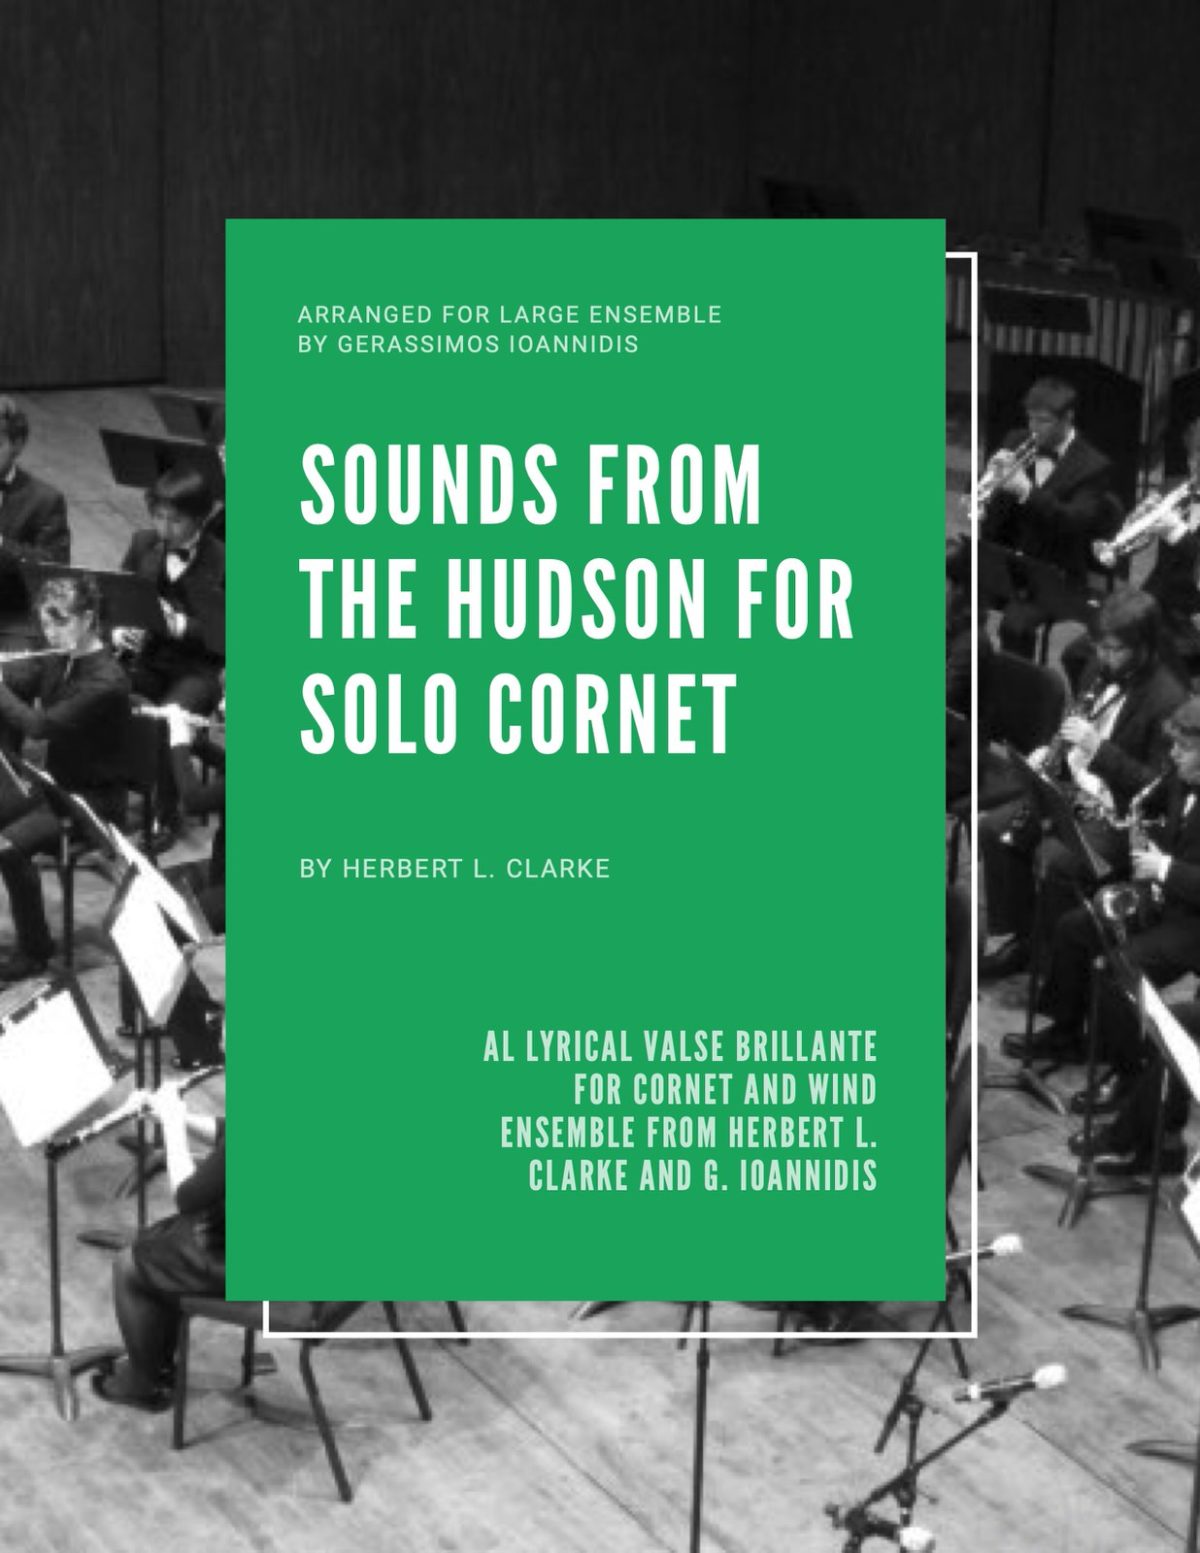 Sounds from the Hudson for Cornet and Wind Ensemble